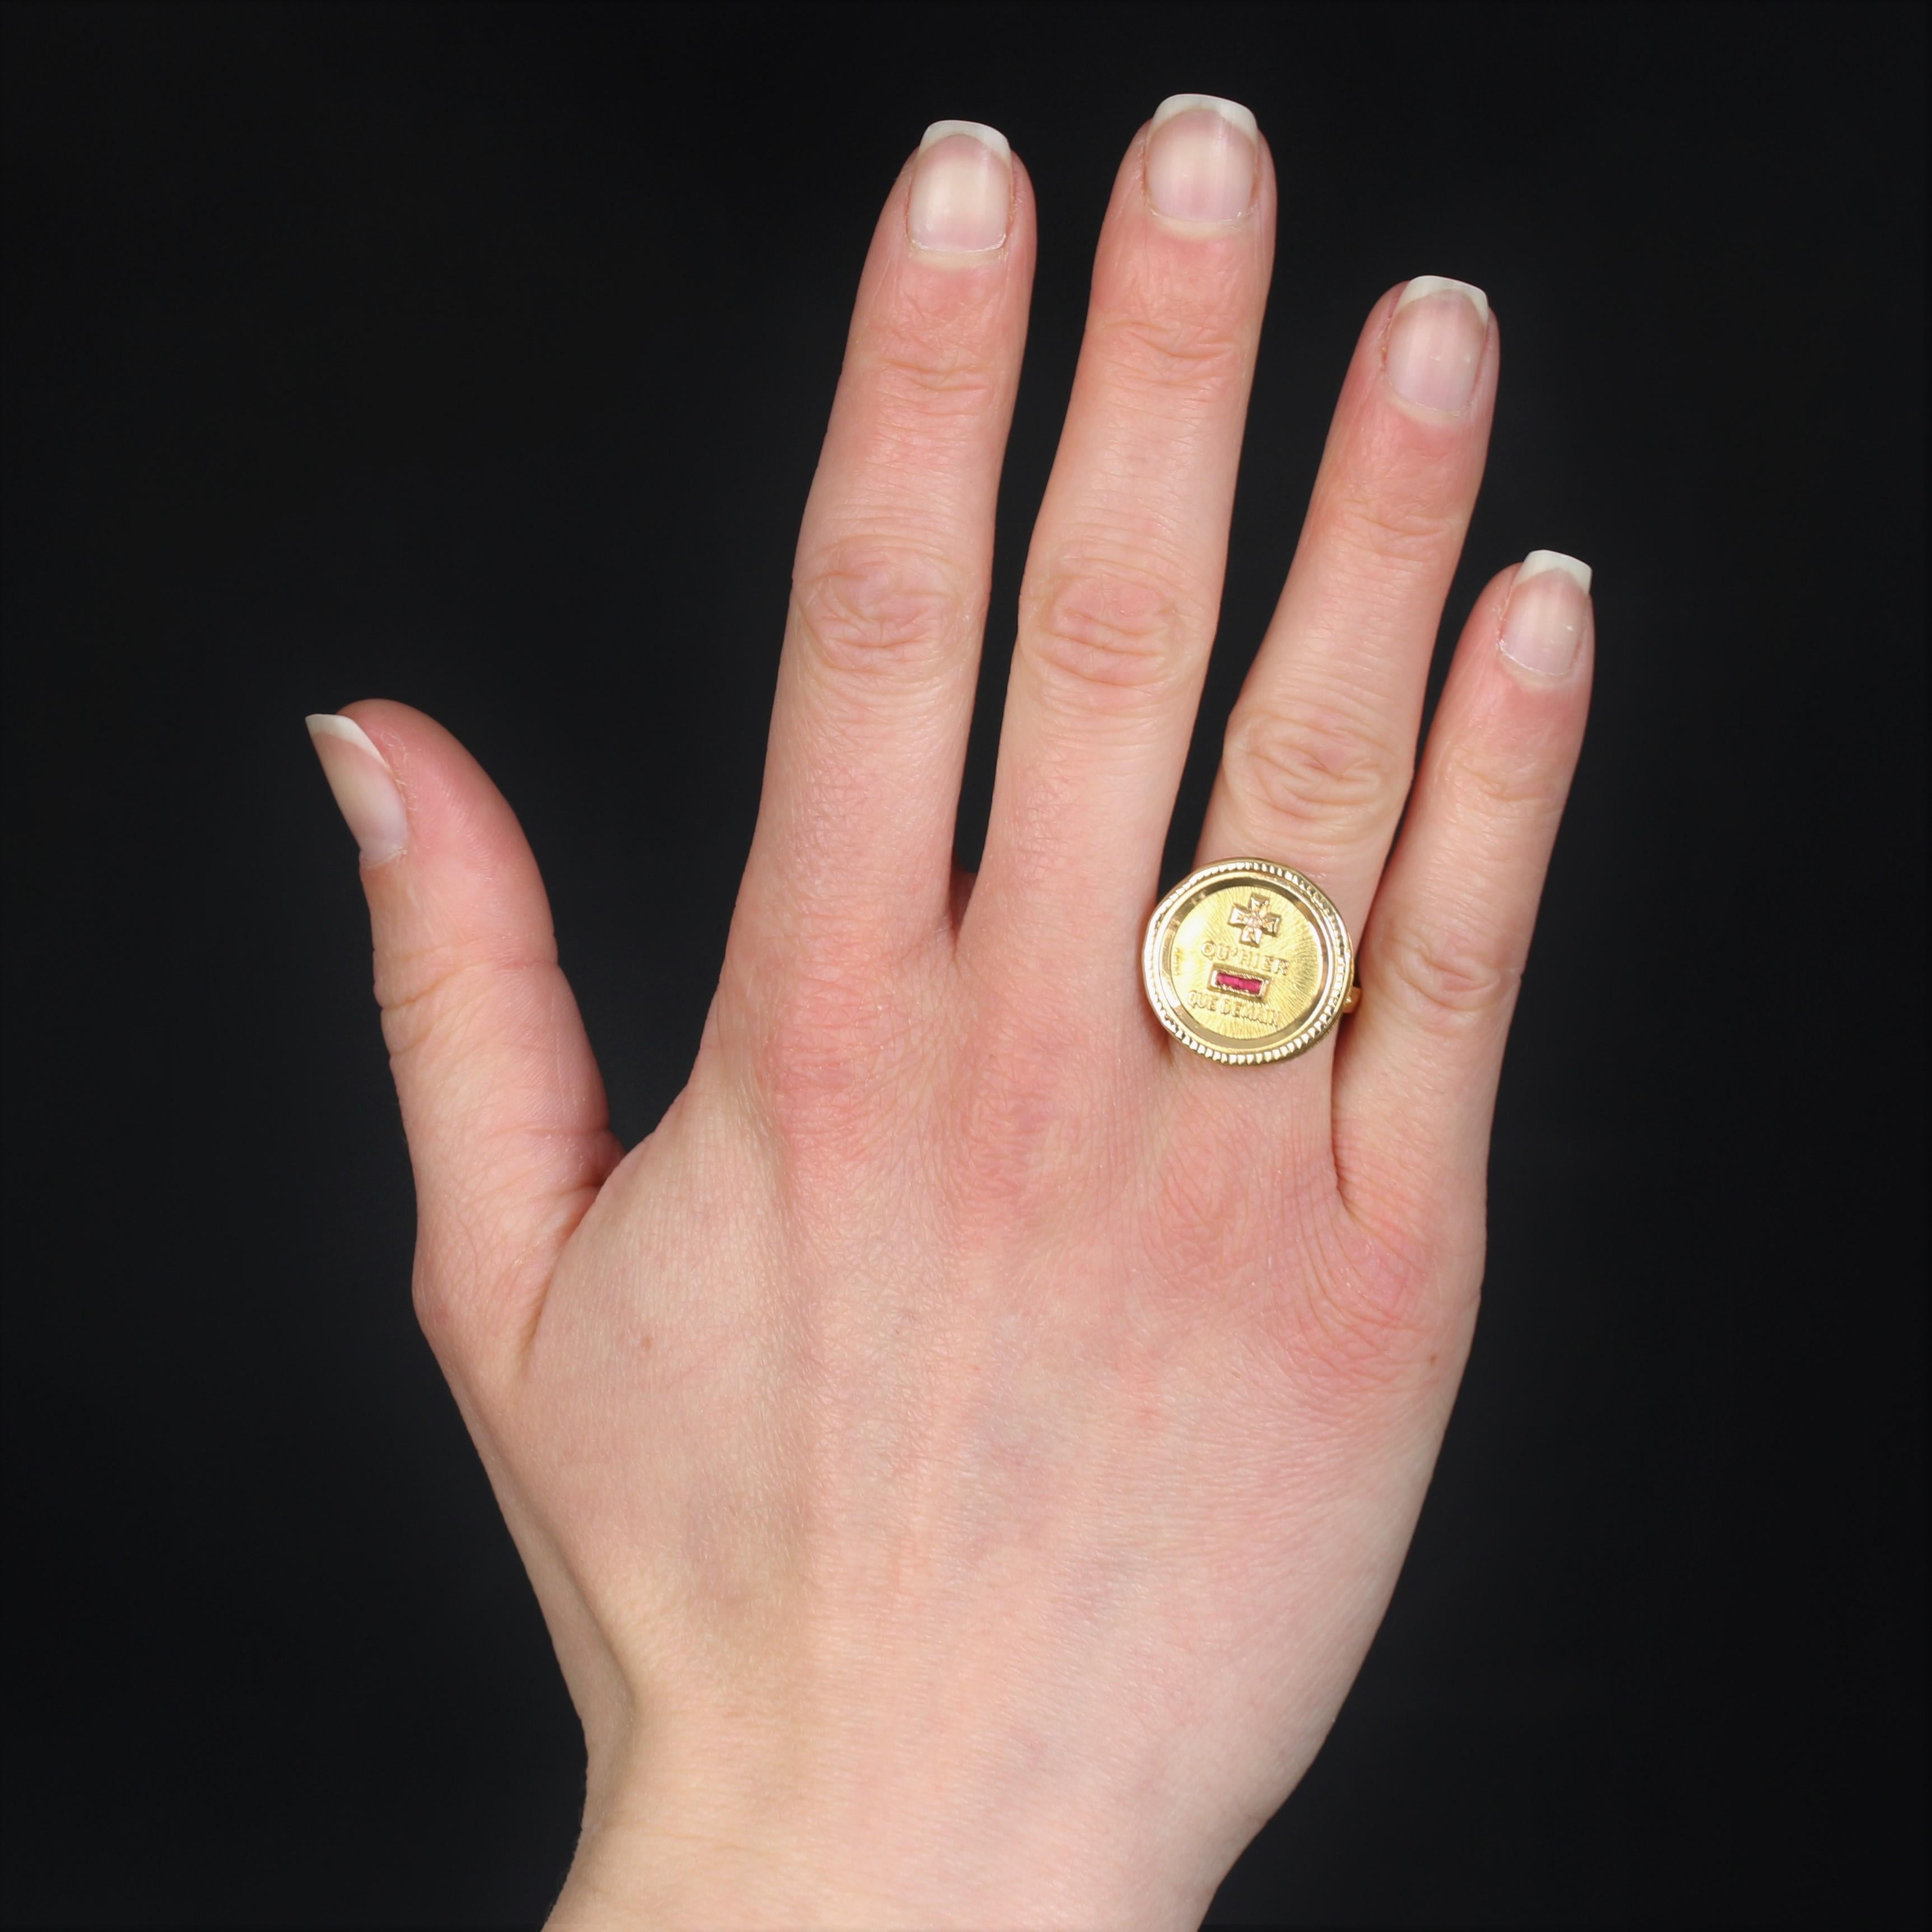 Ring in 18 karat yellow gold, eagle head hallmark.
Yellow gold ring, it is composed of the medal of love 